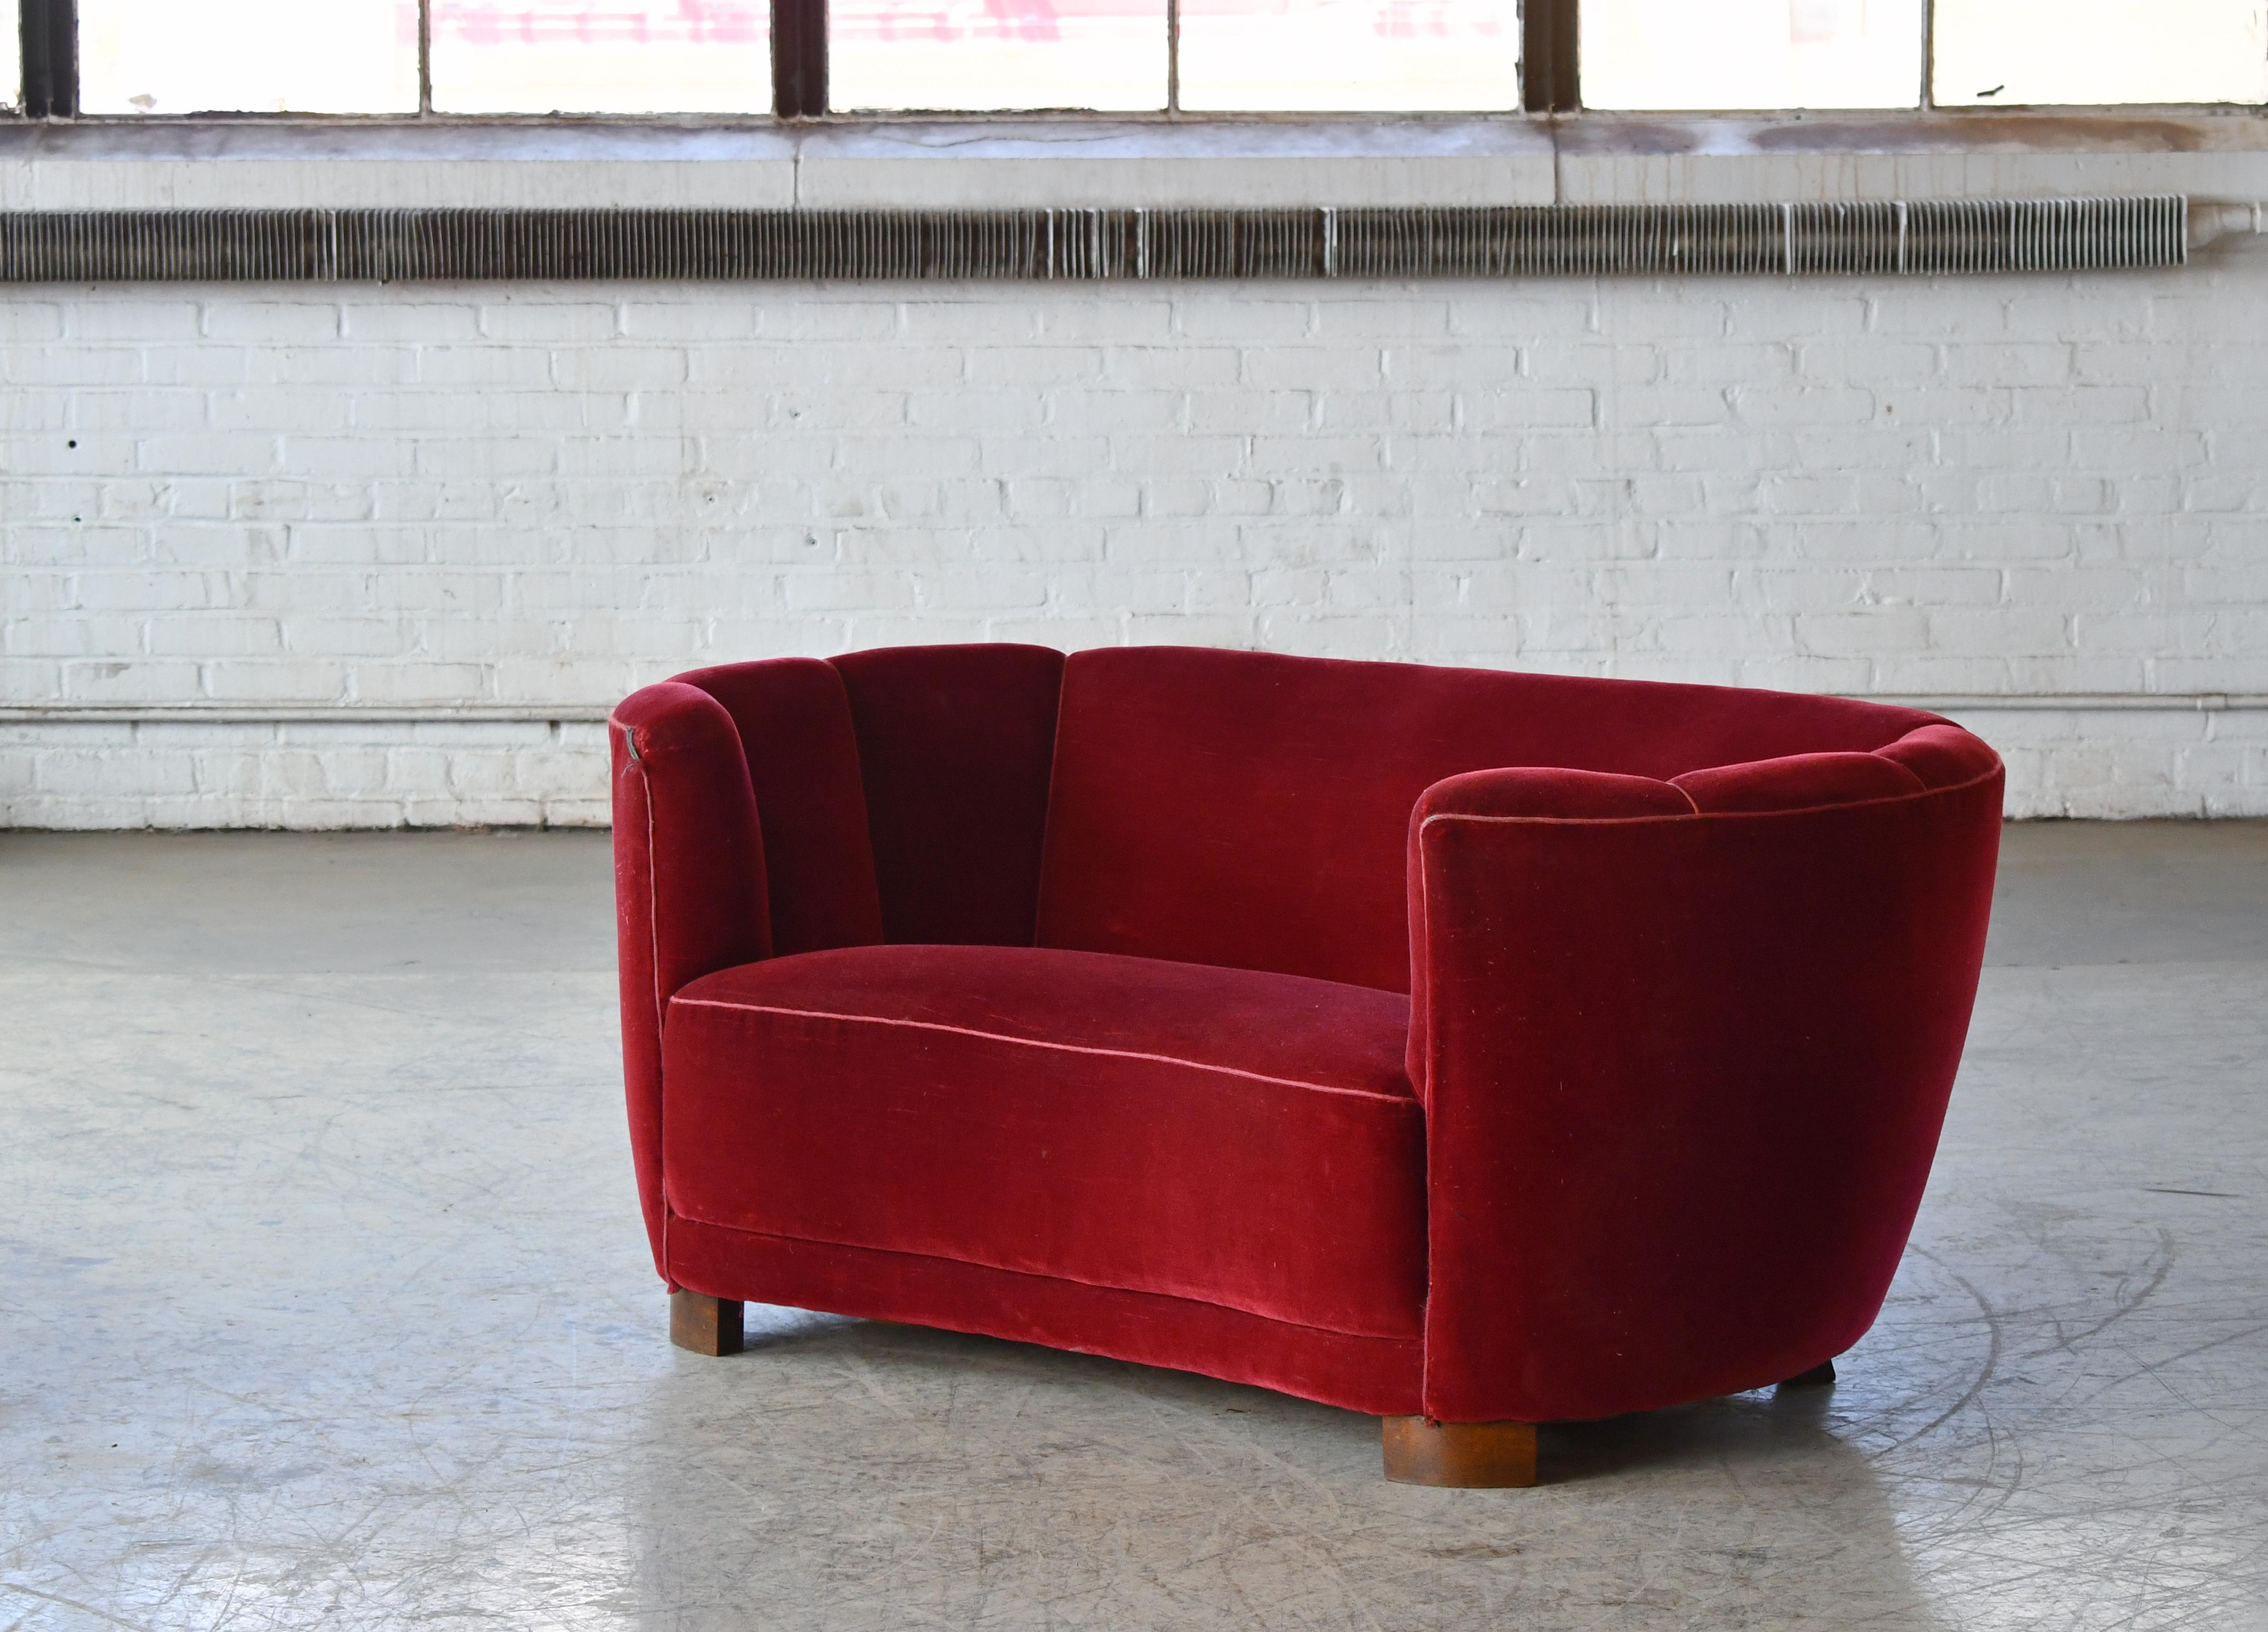 Charming Danish 1940's loveseat. From the era of the curved 